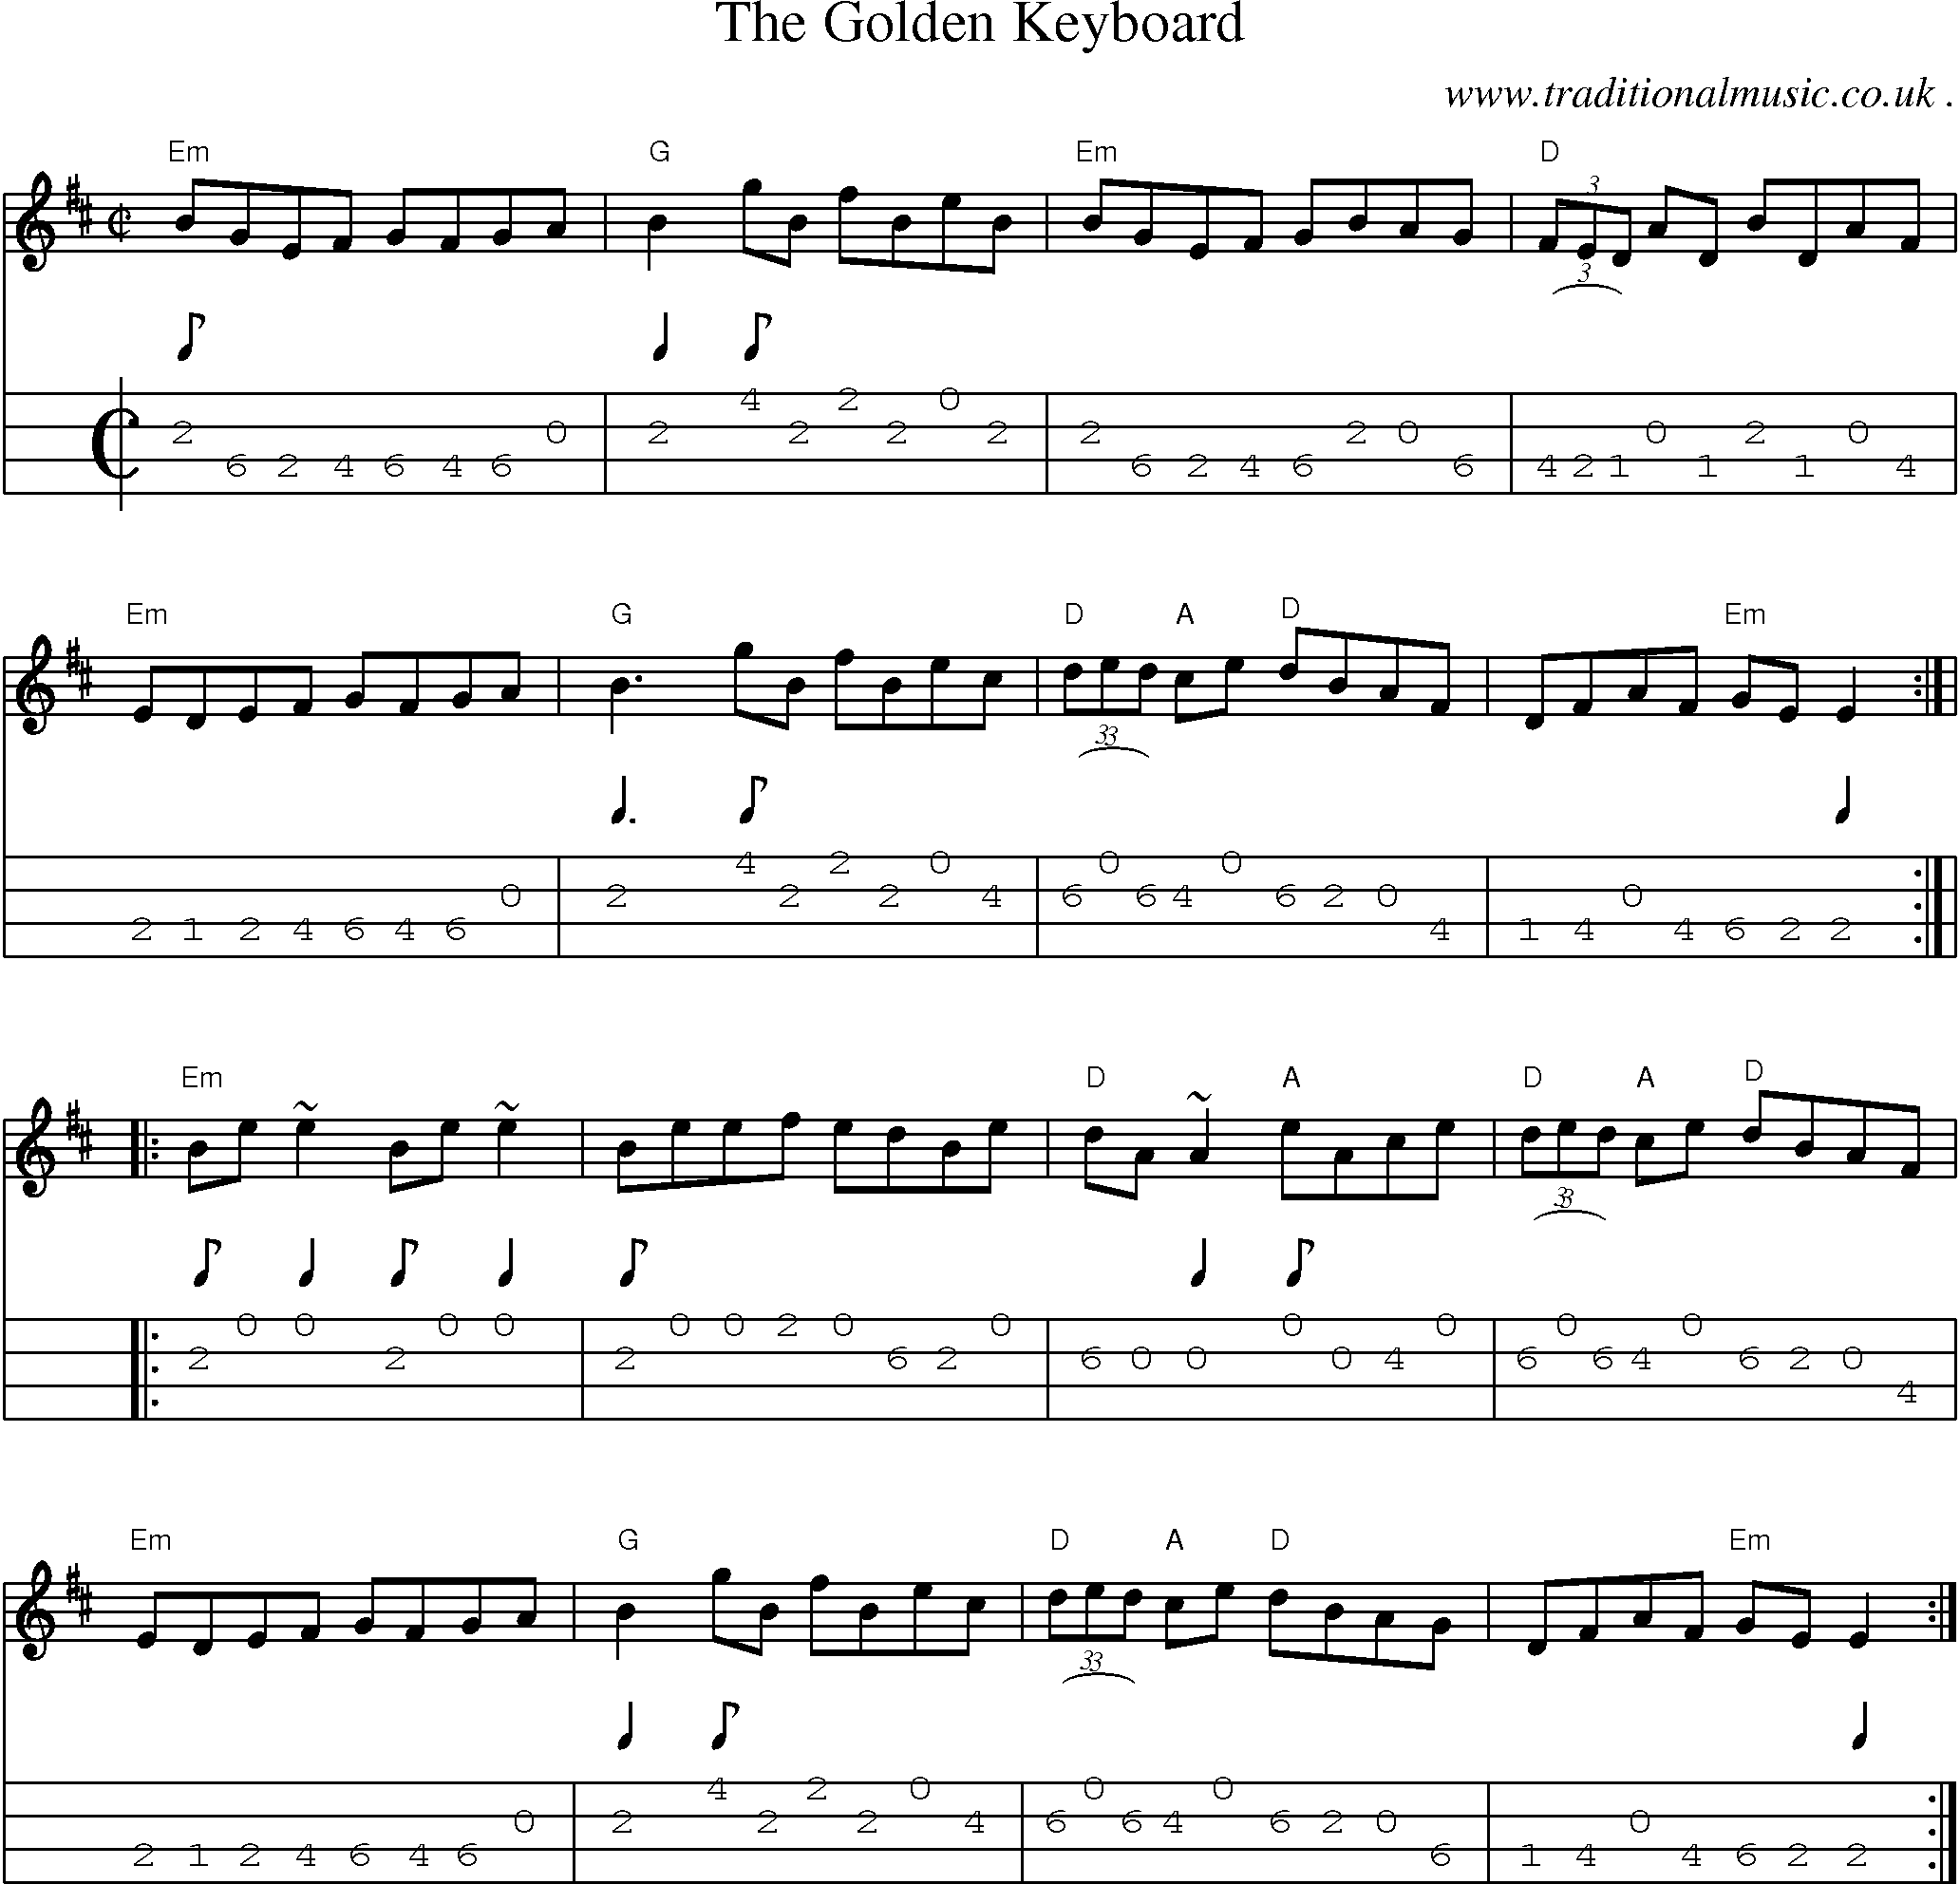 Sheet-music  score, Chords and Mandolin Tabs for The Golden Keyboard